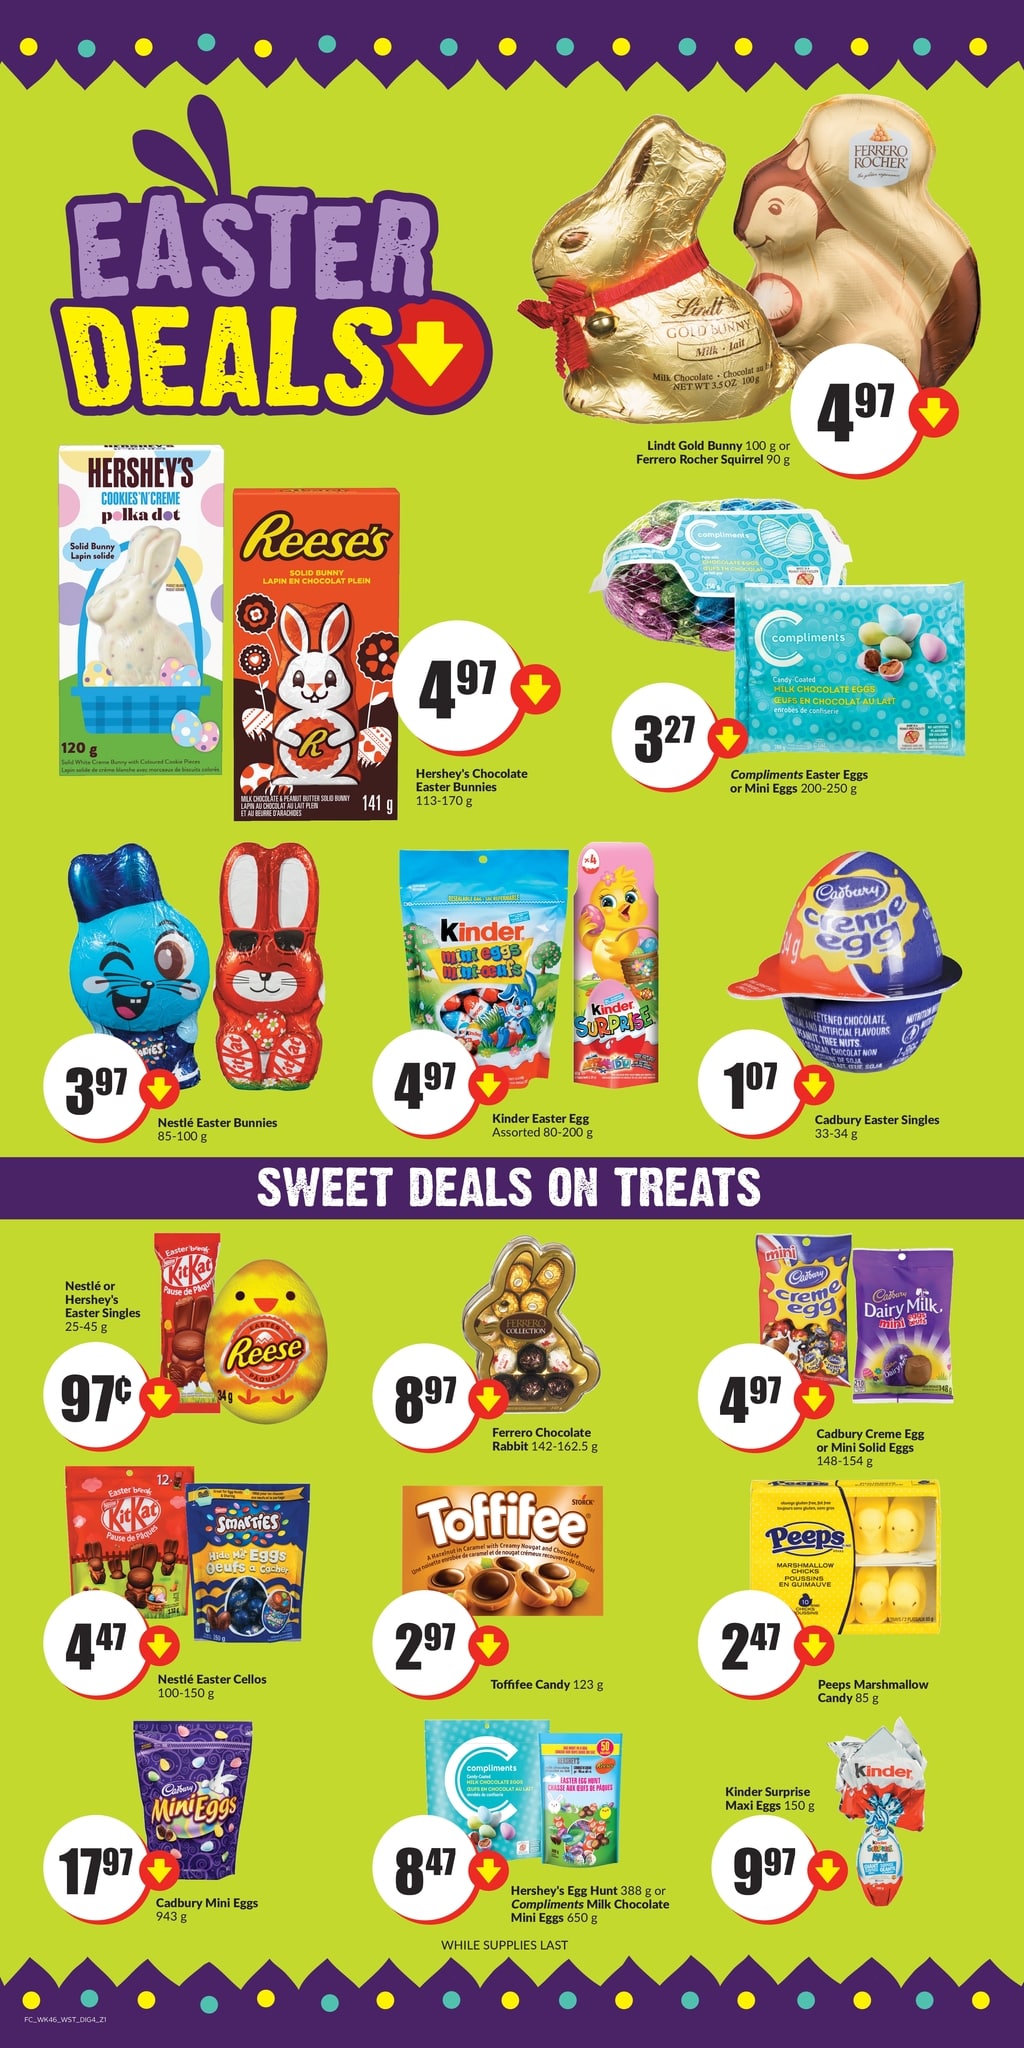 FreshCo - British Columbia - Weekly Flyer Specials - Page 10